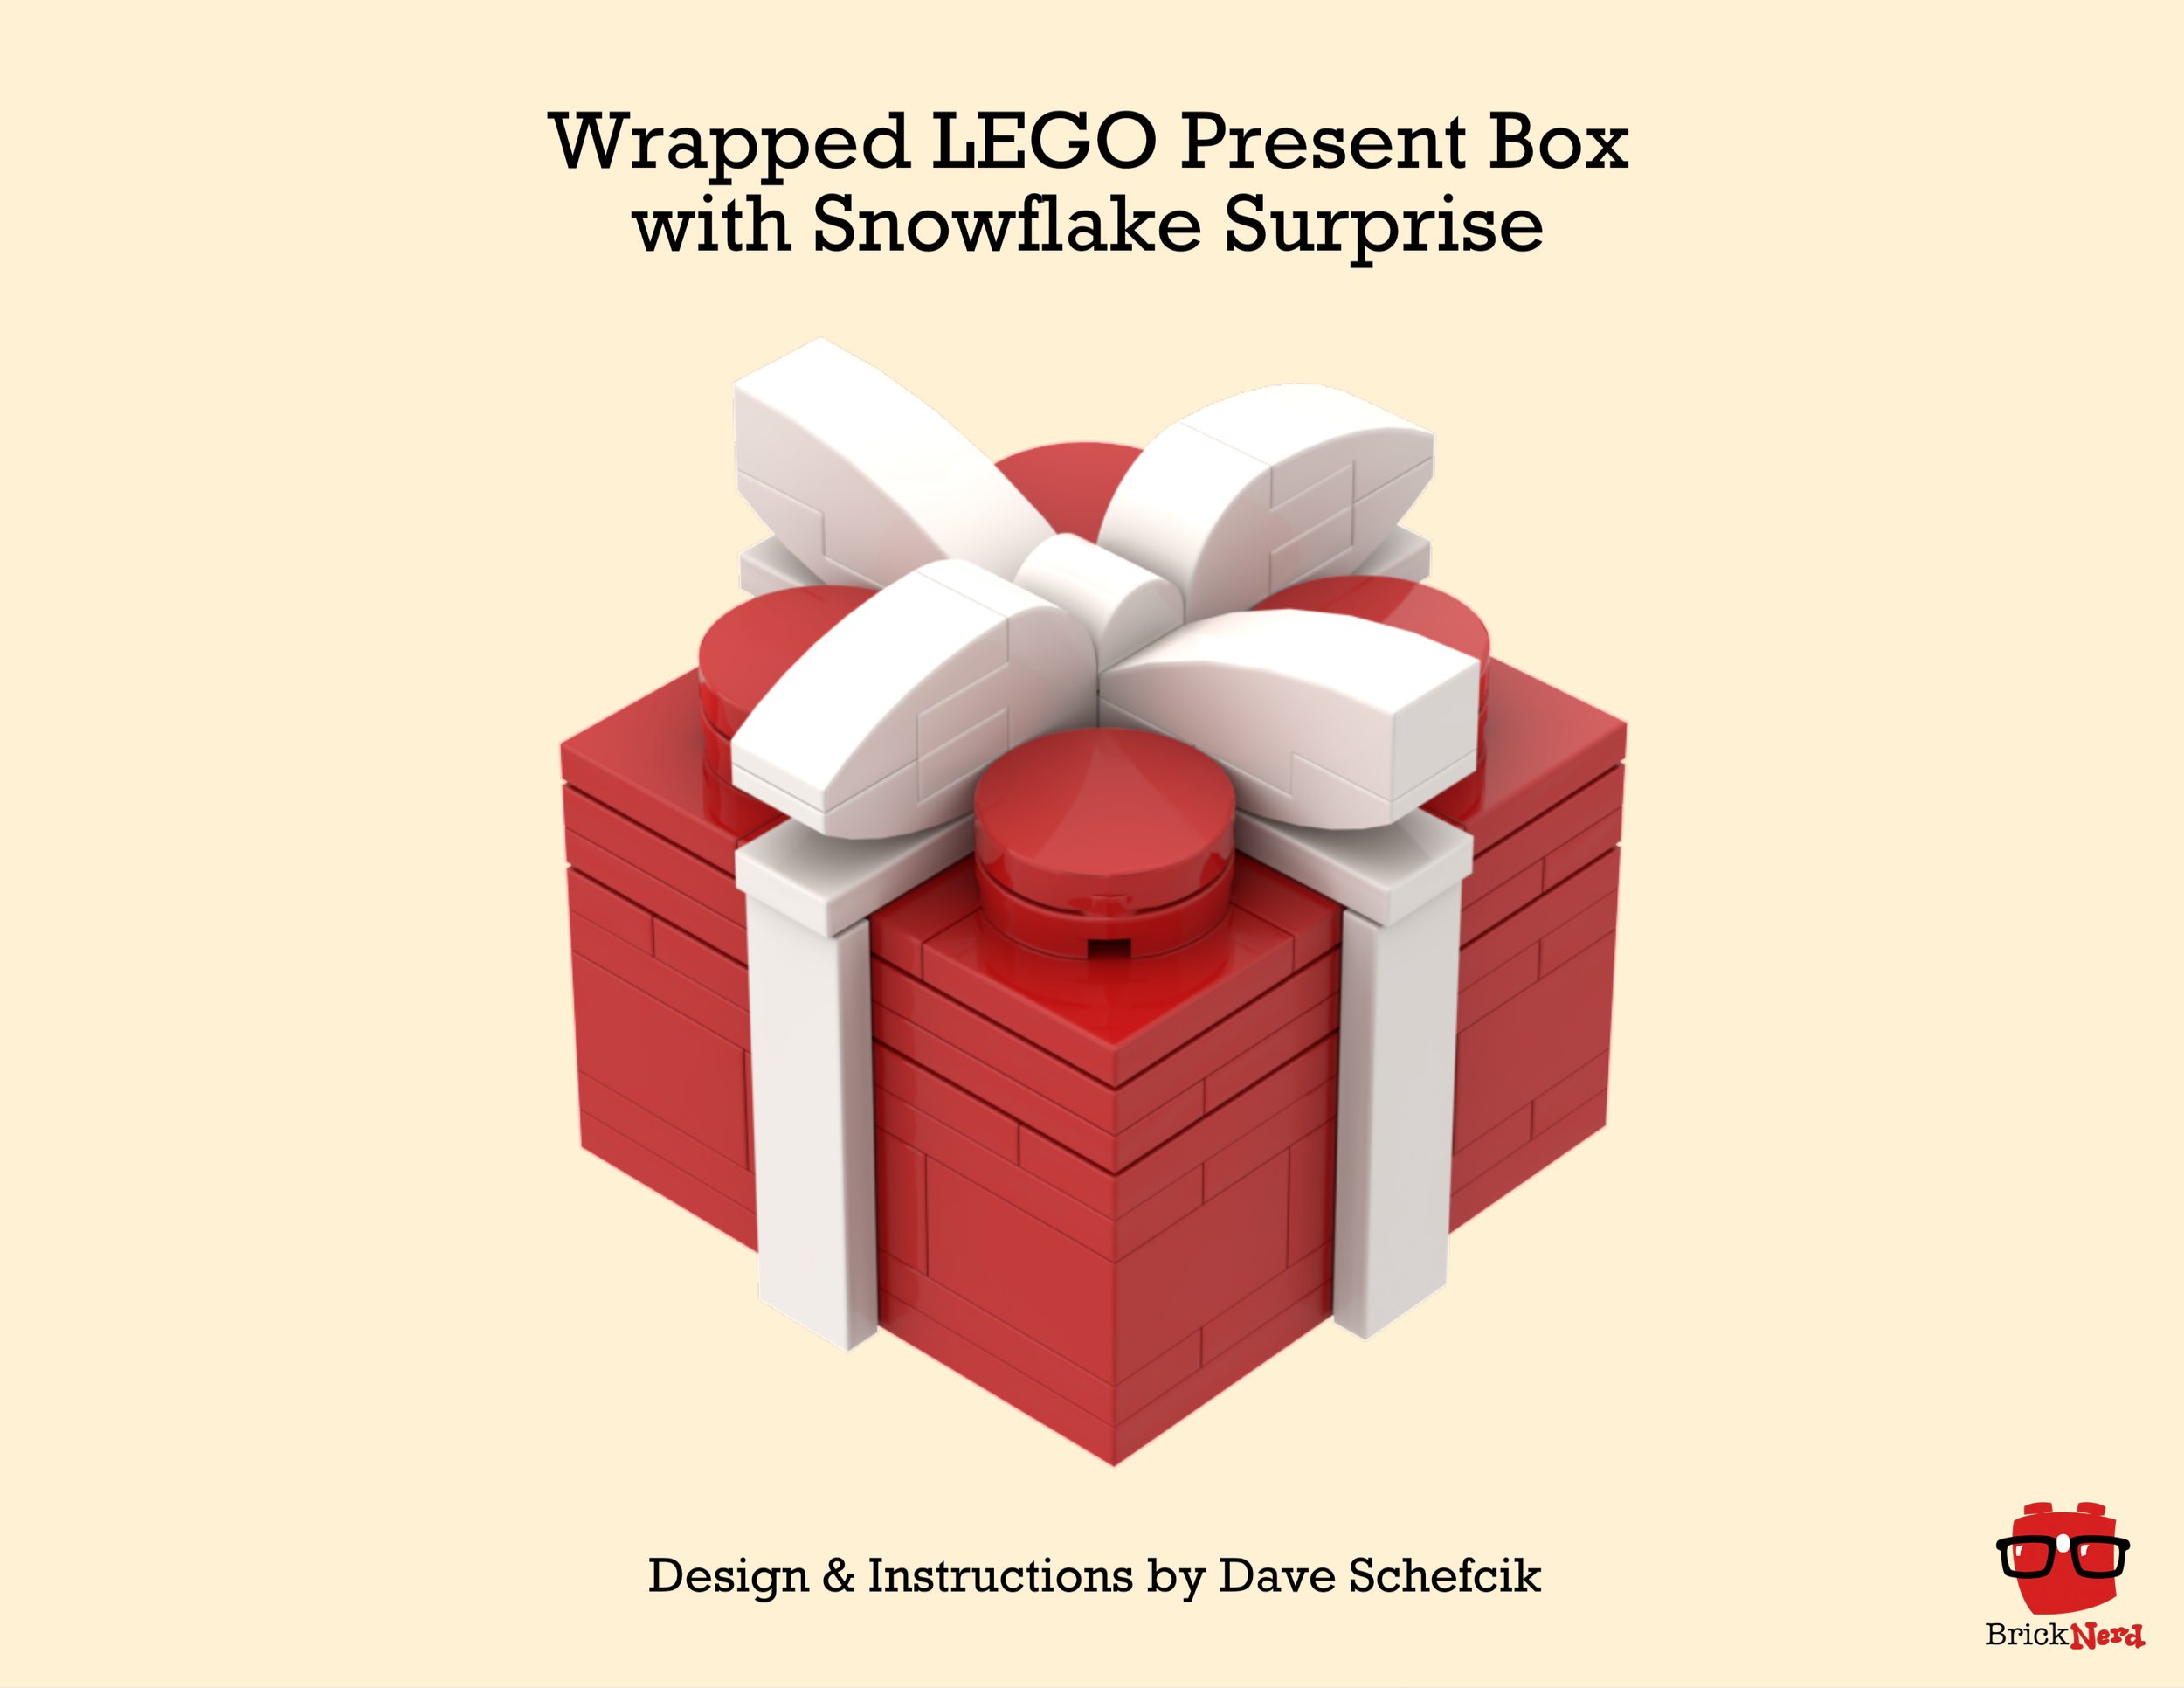 Wrapped LEGO Present Box with Snowflake Surprise Instructions (1).jpg